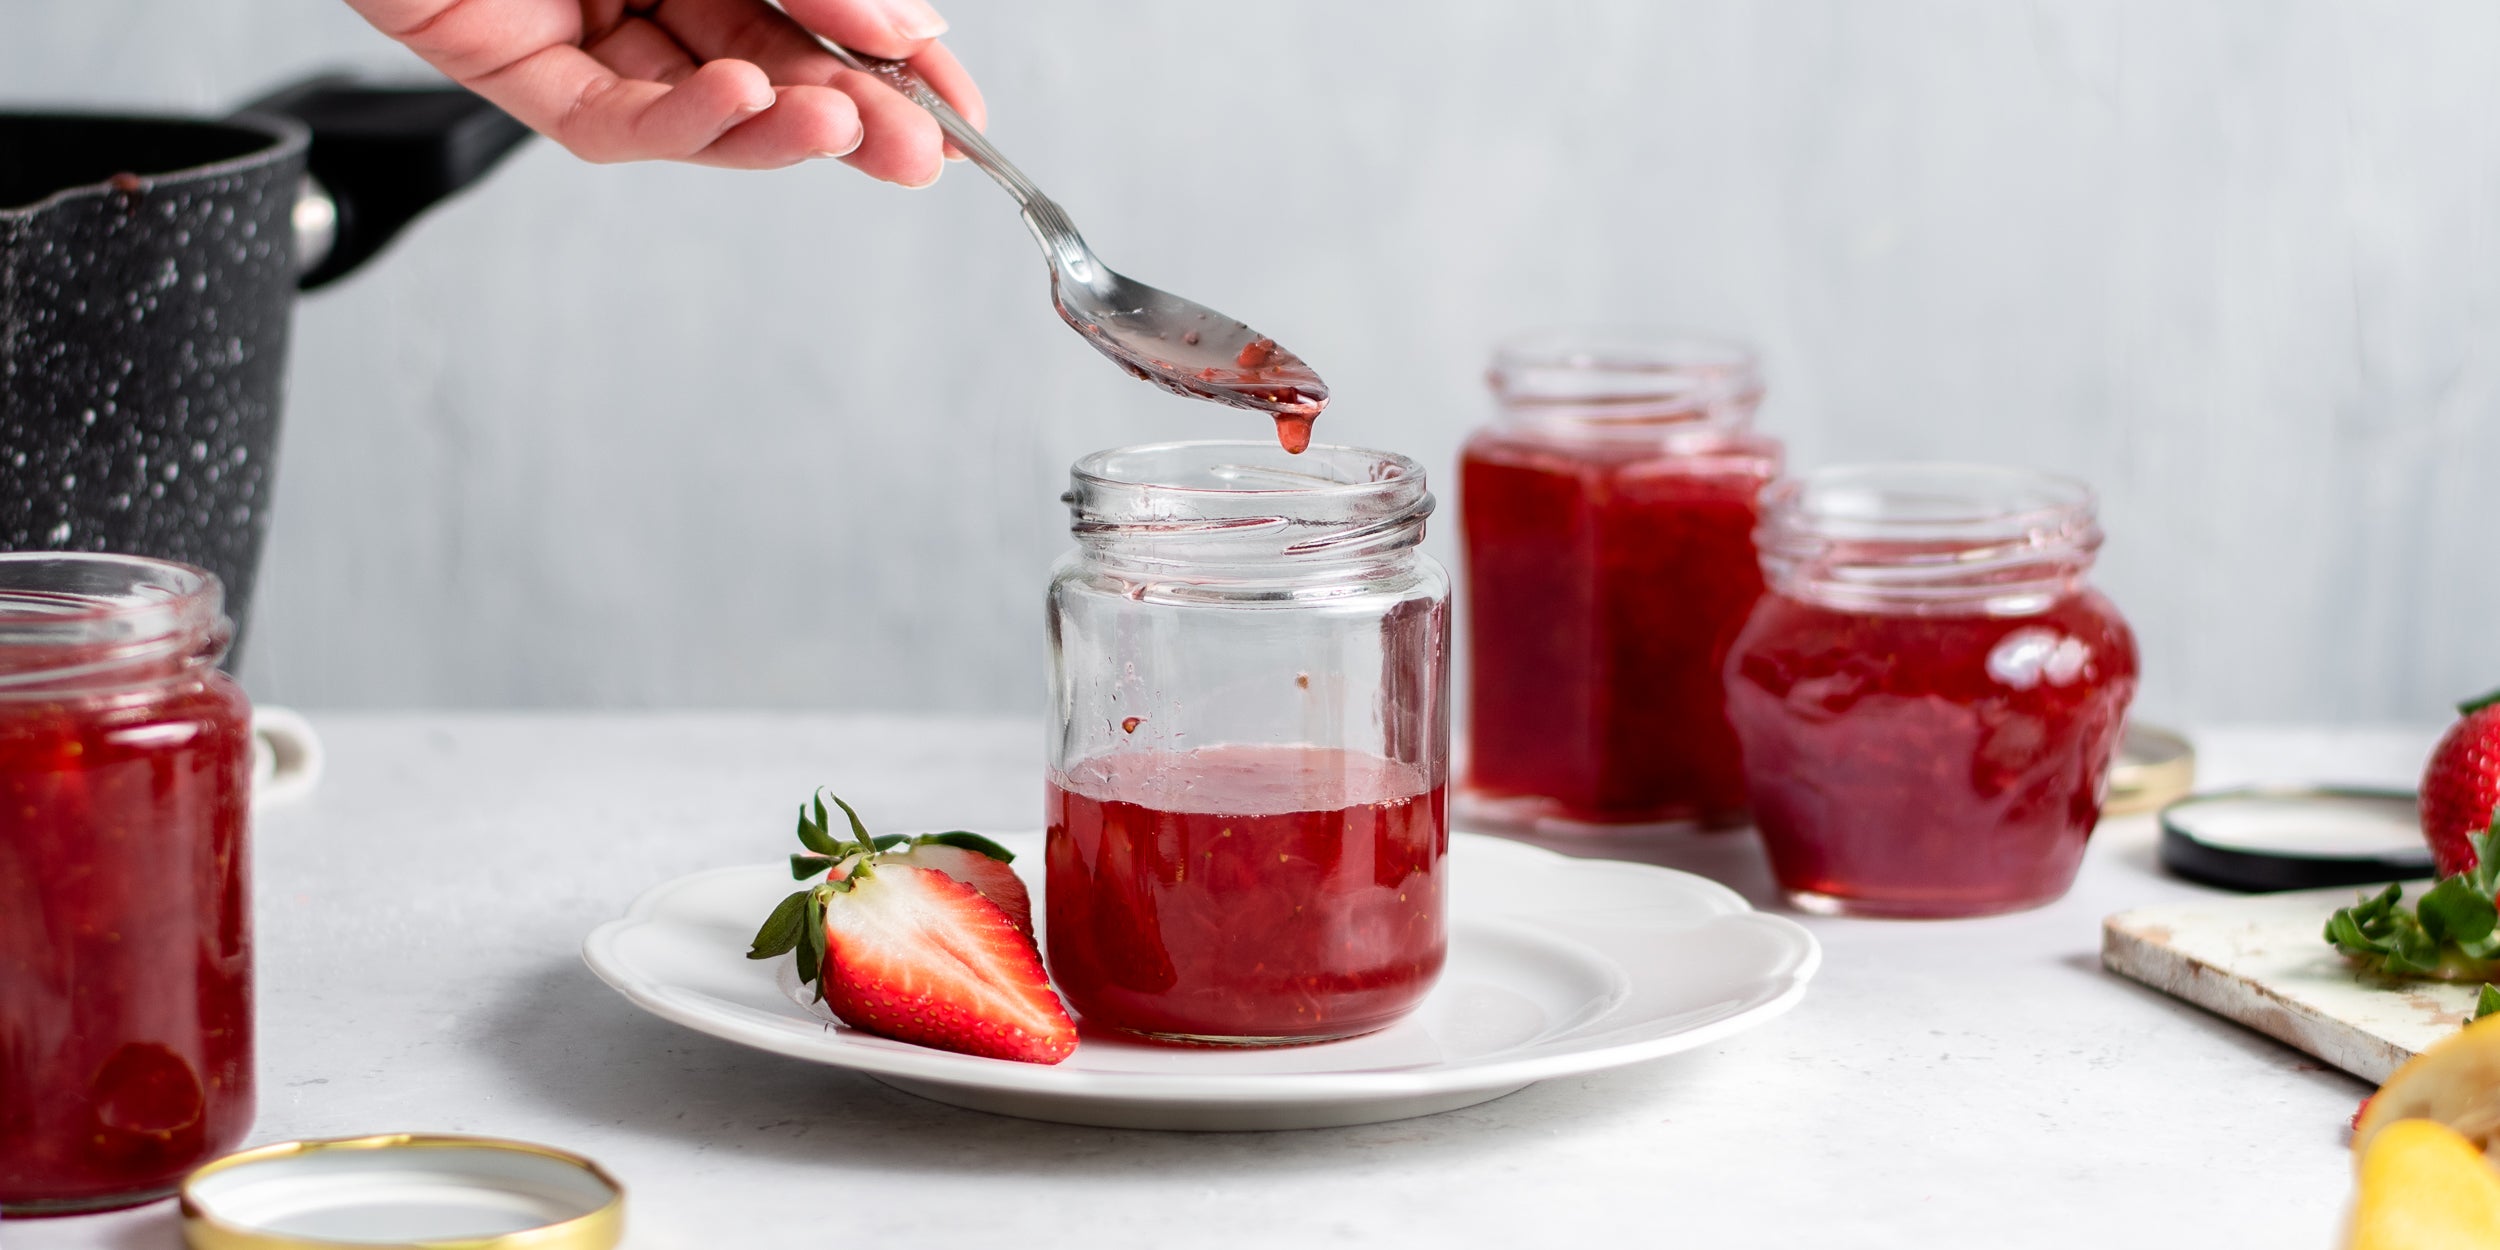 Strawberry Jam being spooned out of a jar with a hand holding a spoon next to sliced strawberries